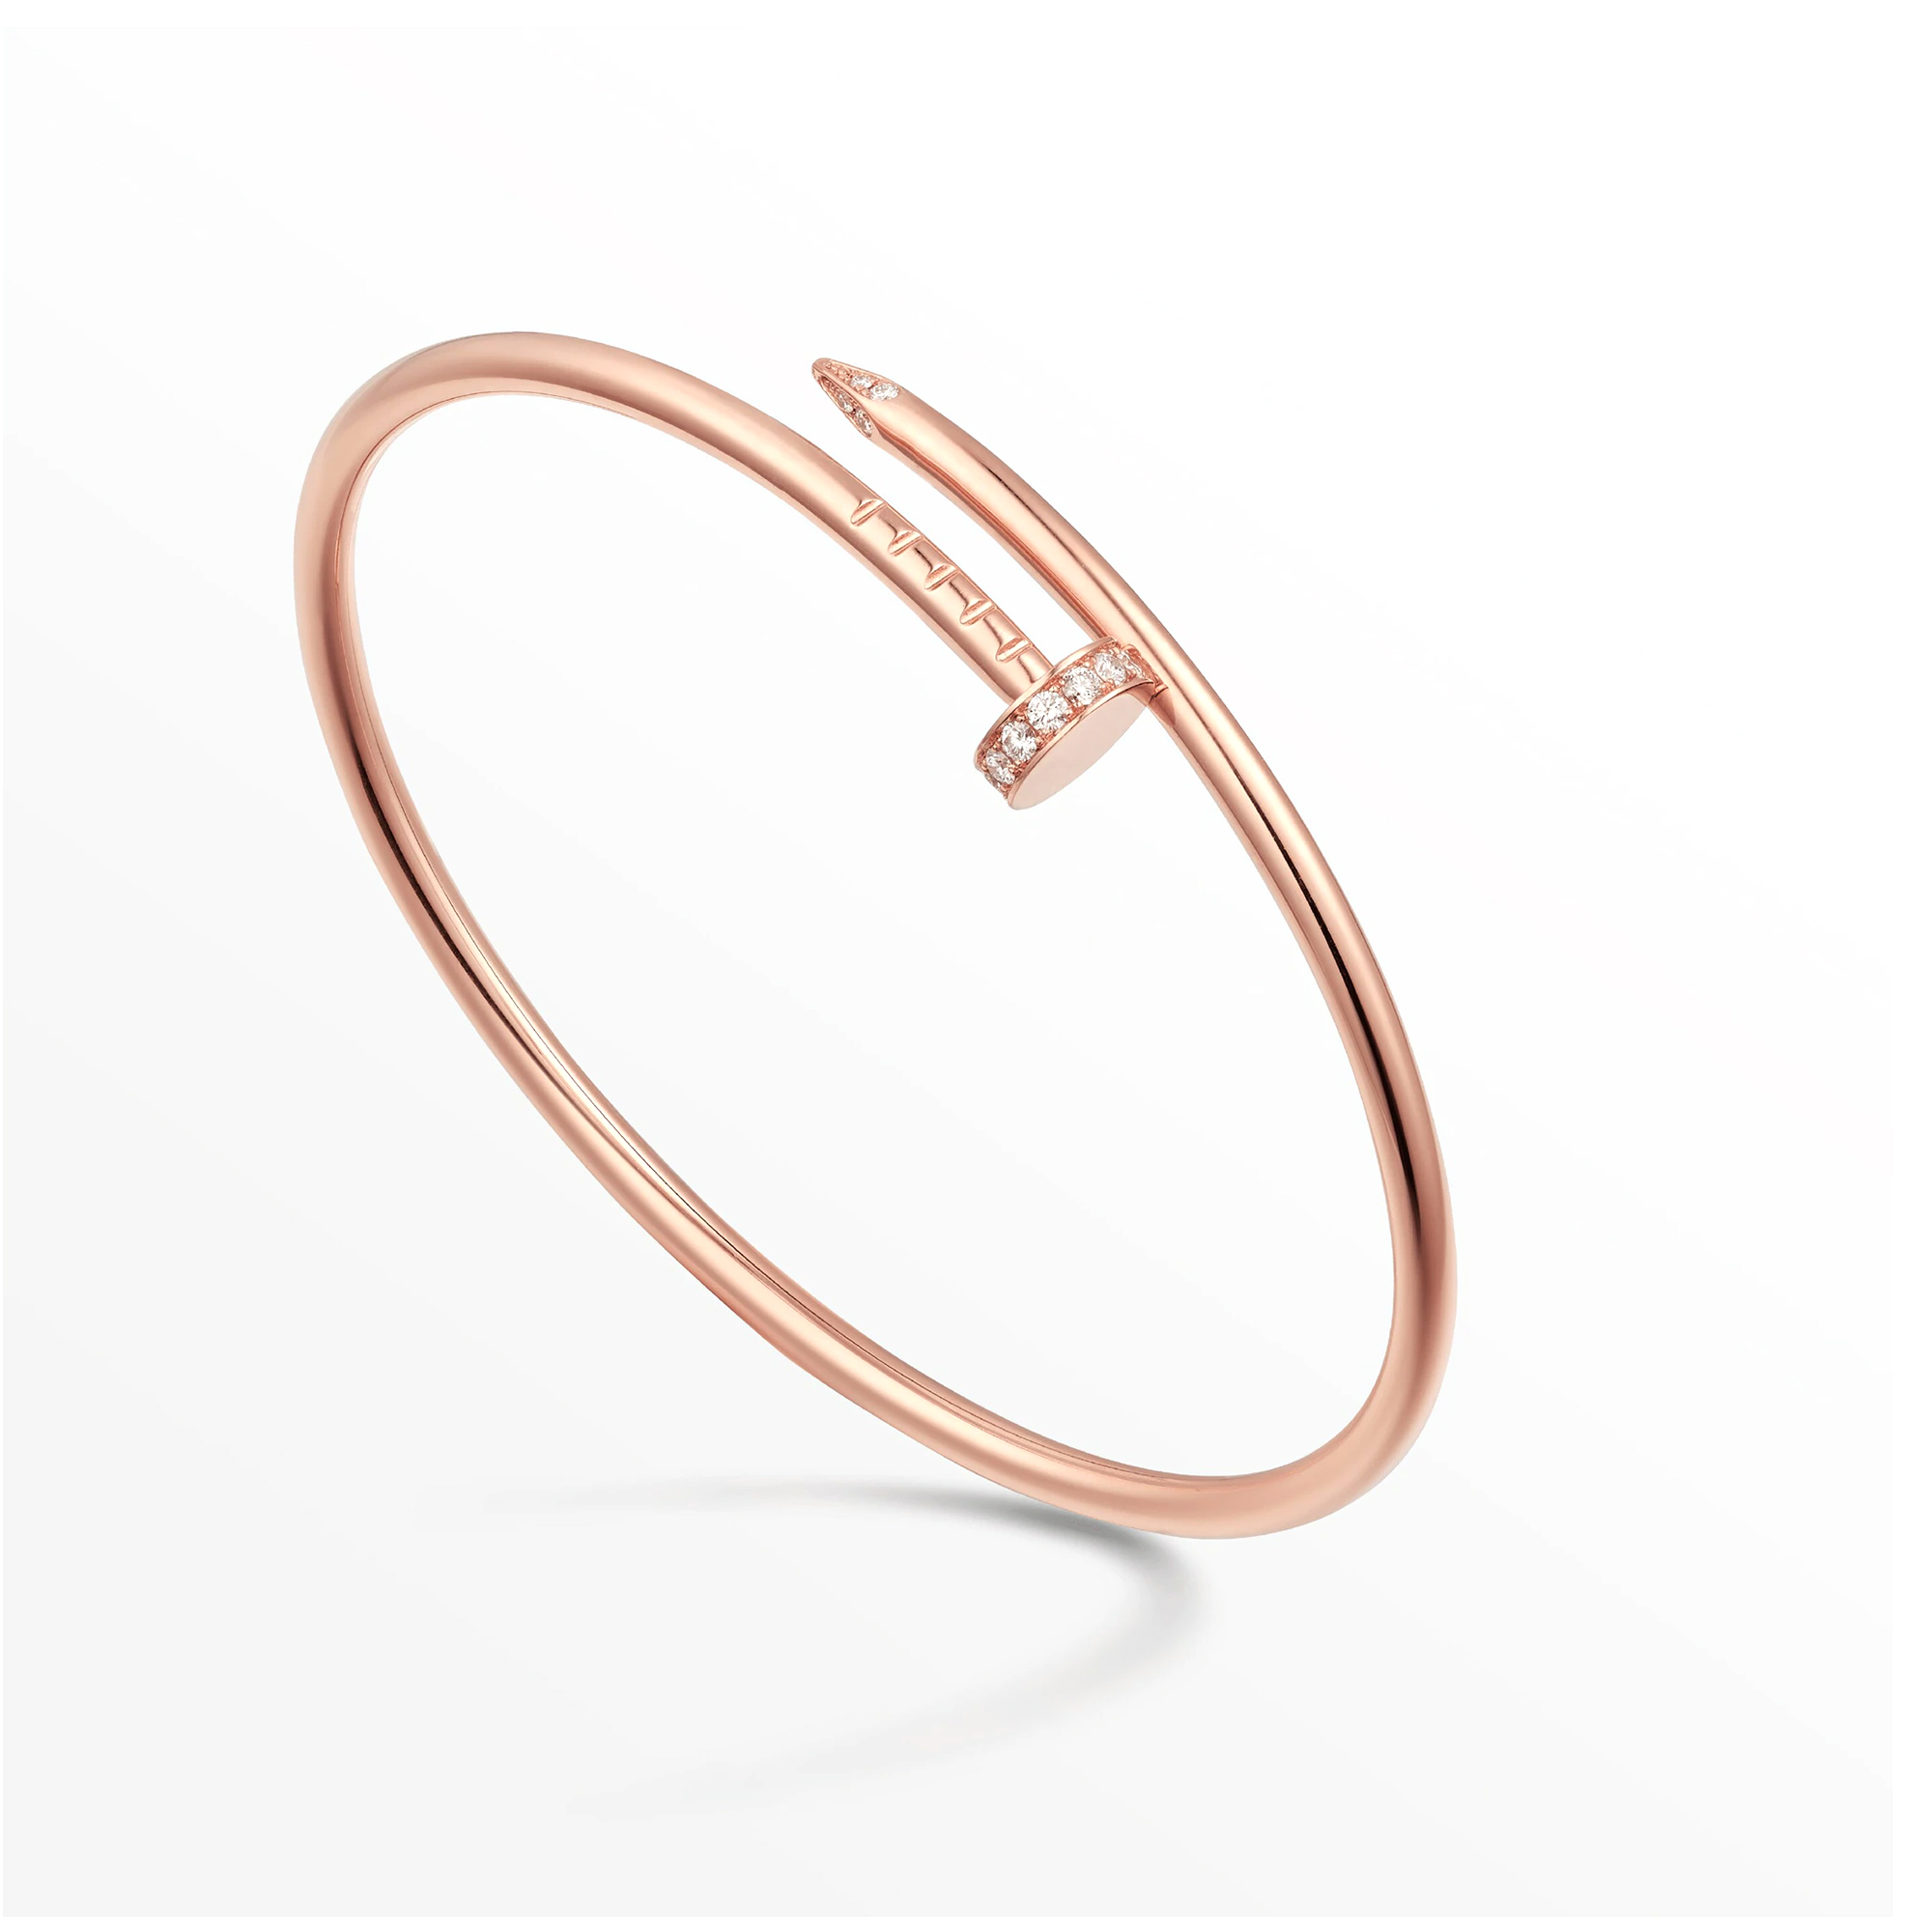 KIKICHIC | NYC | Minimal Nail Bangle Bracelet Stainless Steel in Gold and  Silver